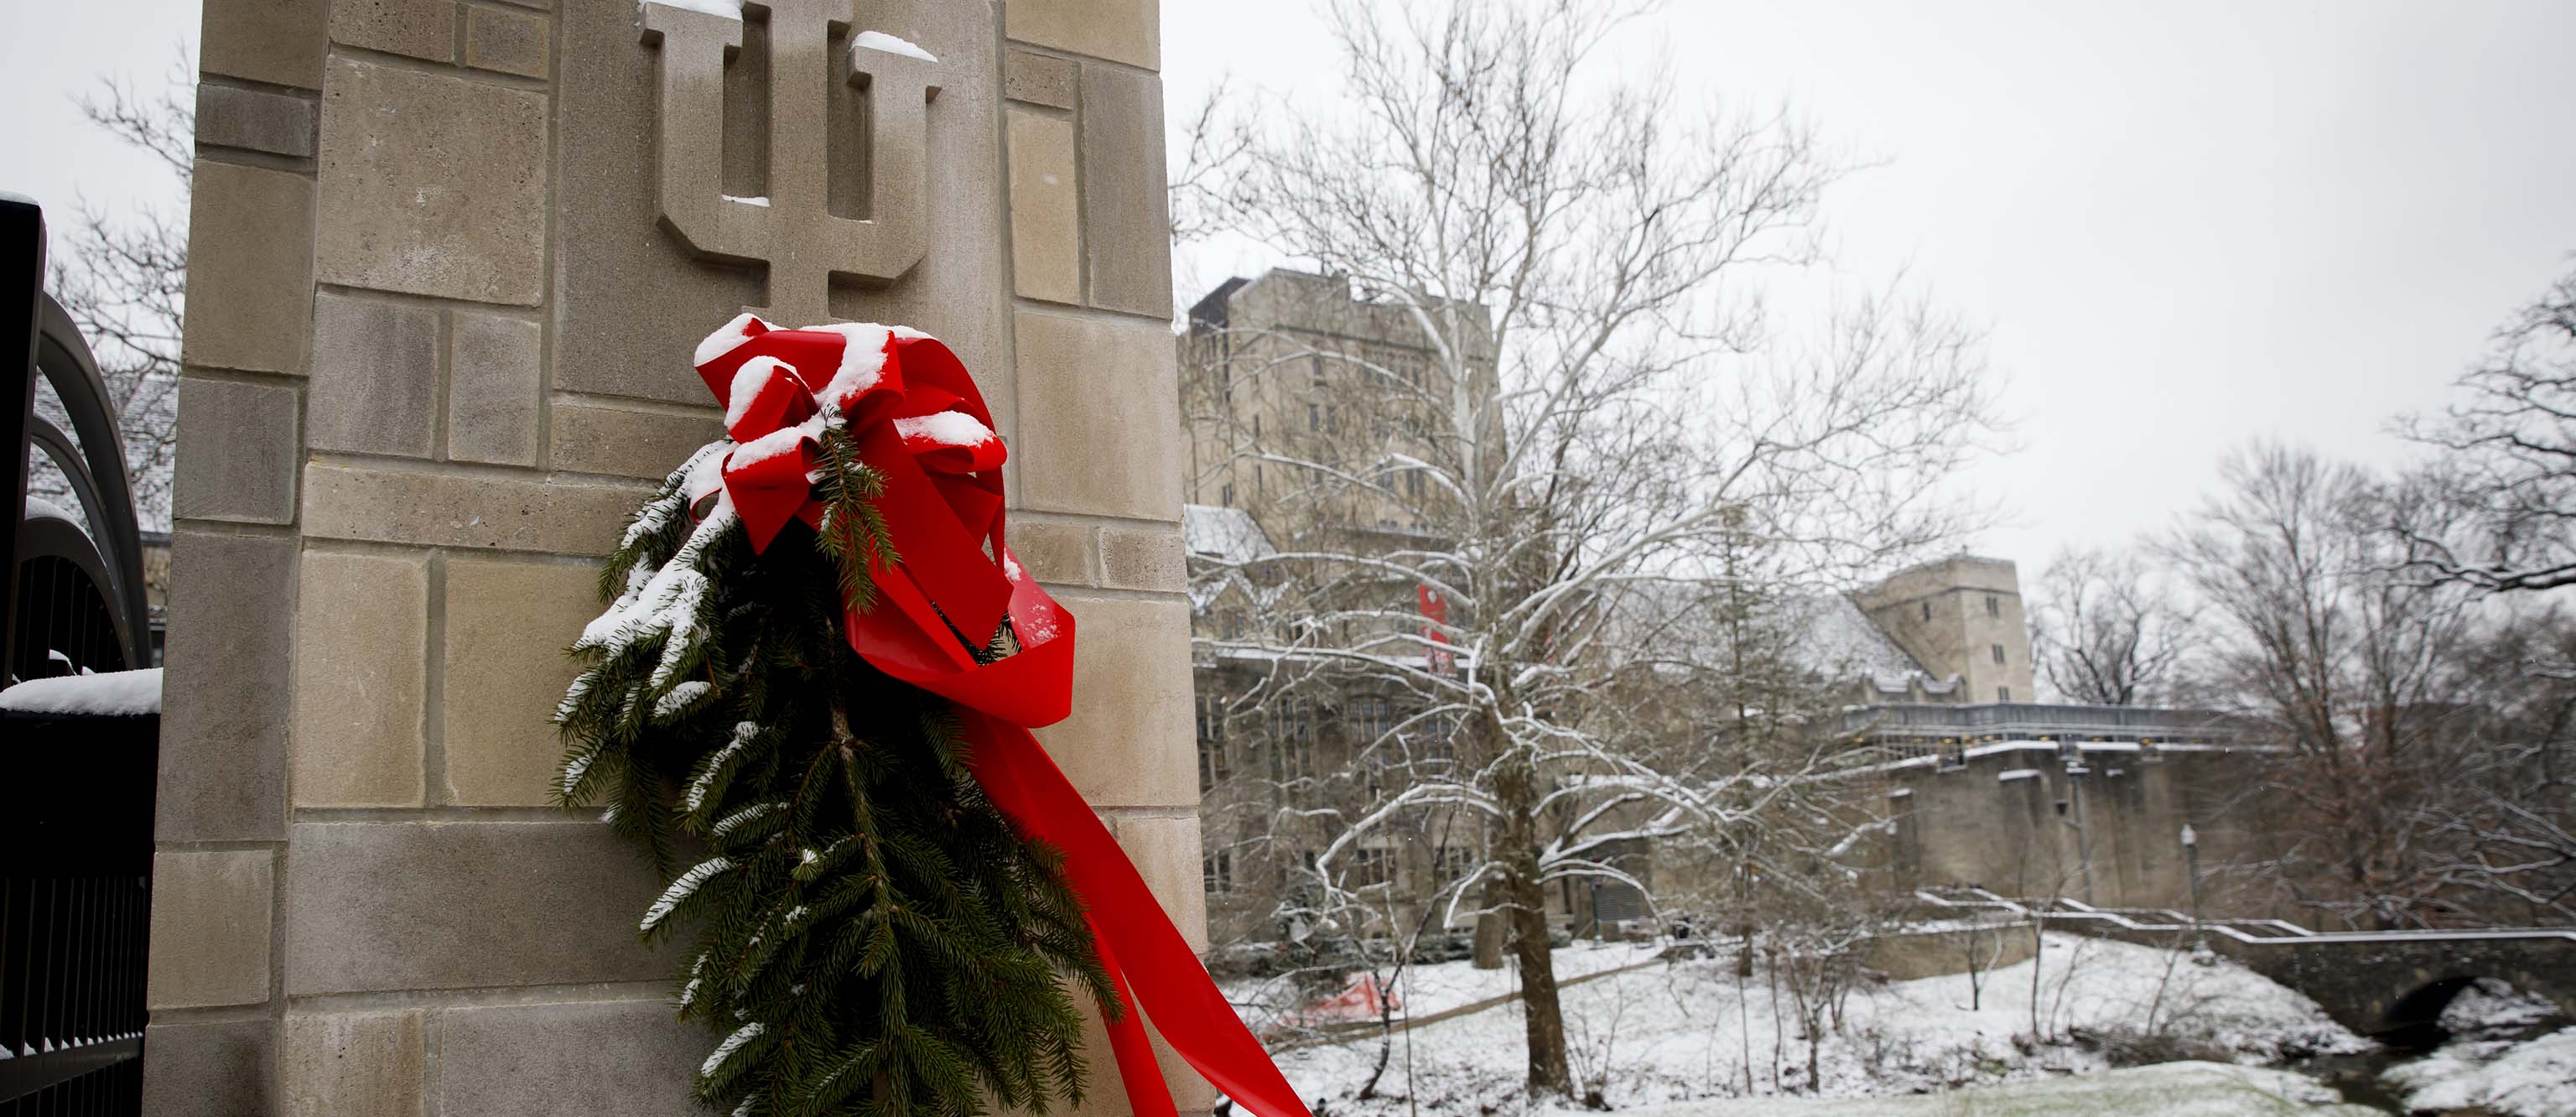 Pine branches bundled with a large red bow at the top hang just below a carved IU trident in a limestone gate post outside the Indiana Memorial Union. The IMU and Campus River are seen in the background. Snow covers the ground. There is snow on the decoration as well.